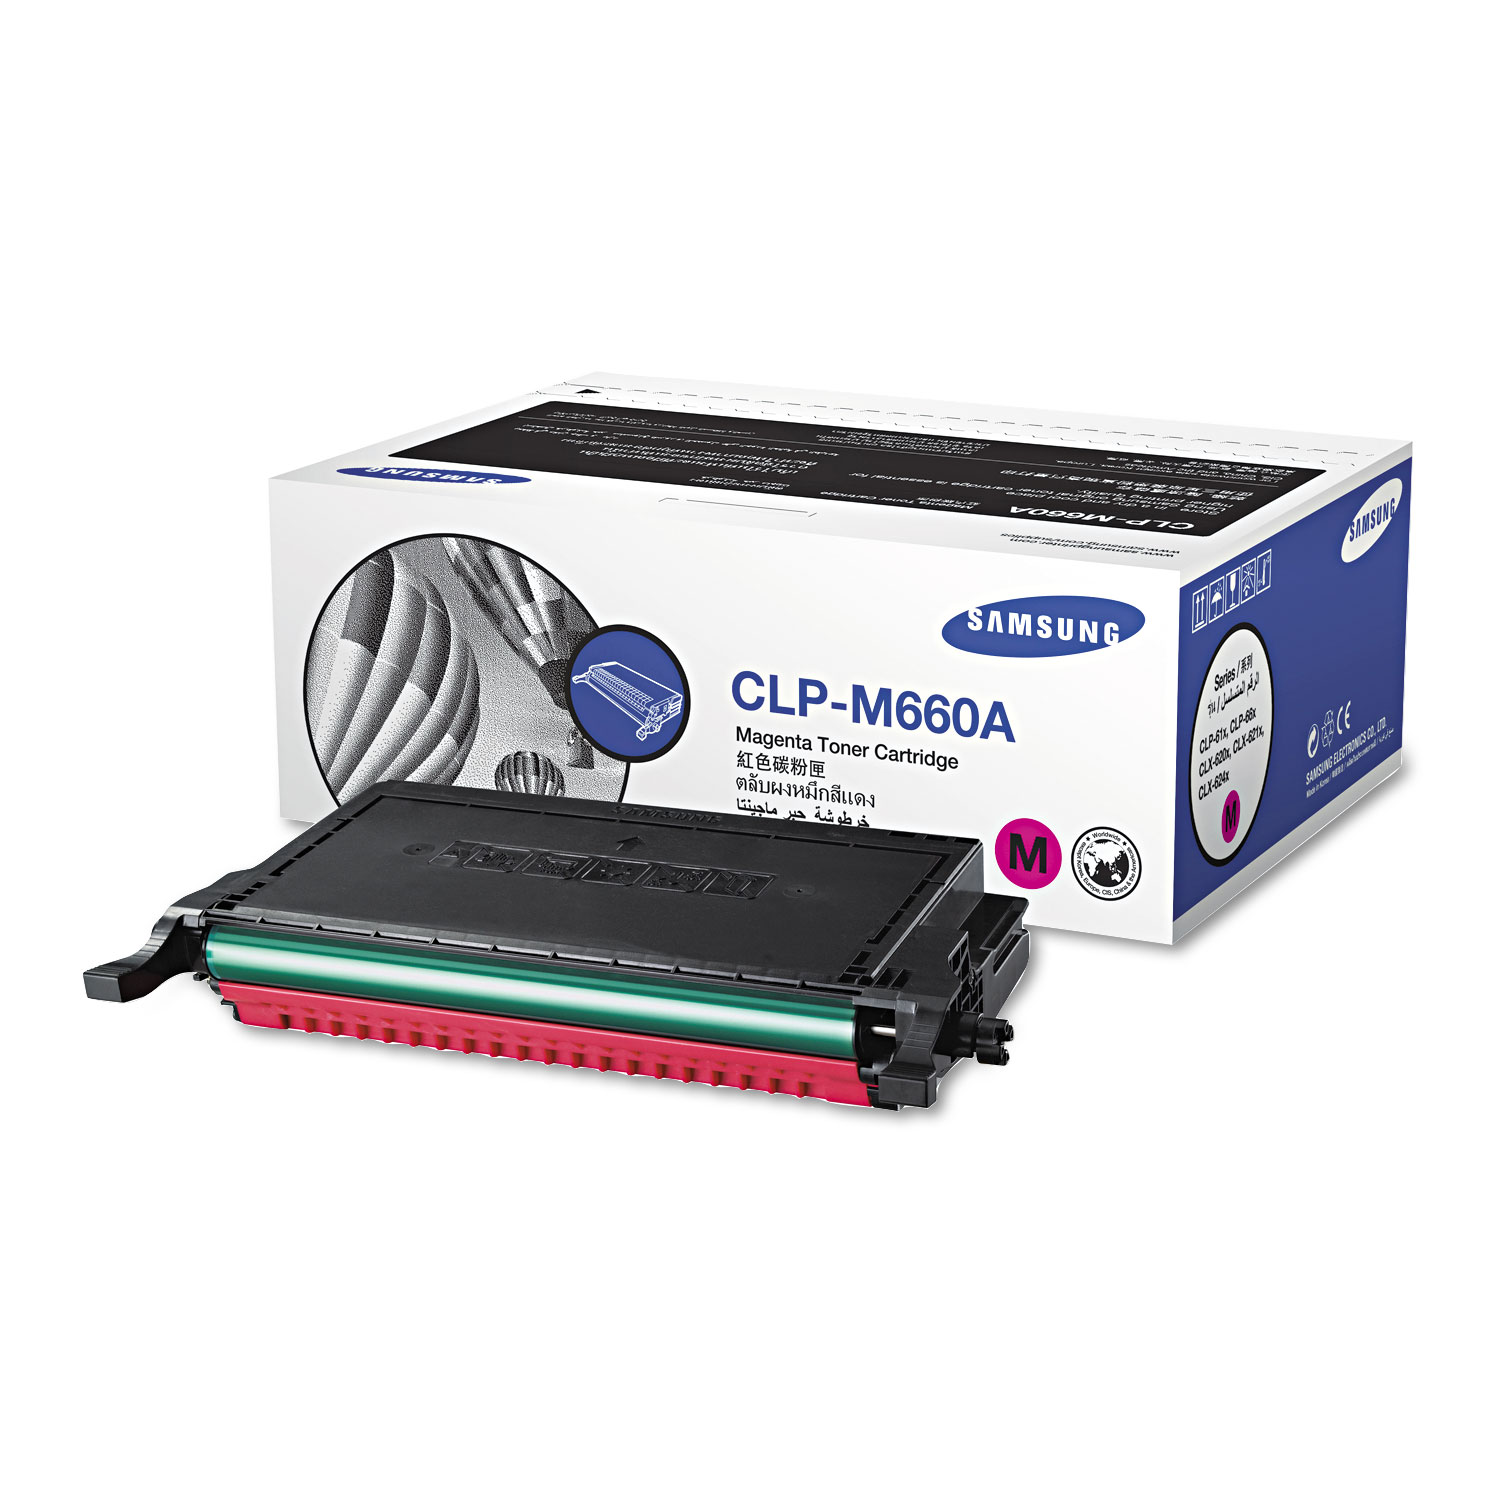 CLPM660A Toner, 2000 Page-Yield, Magenta